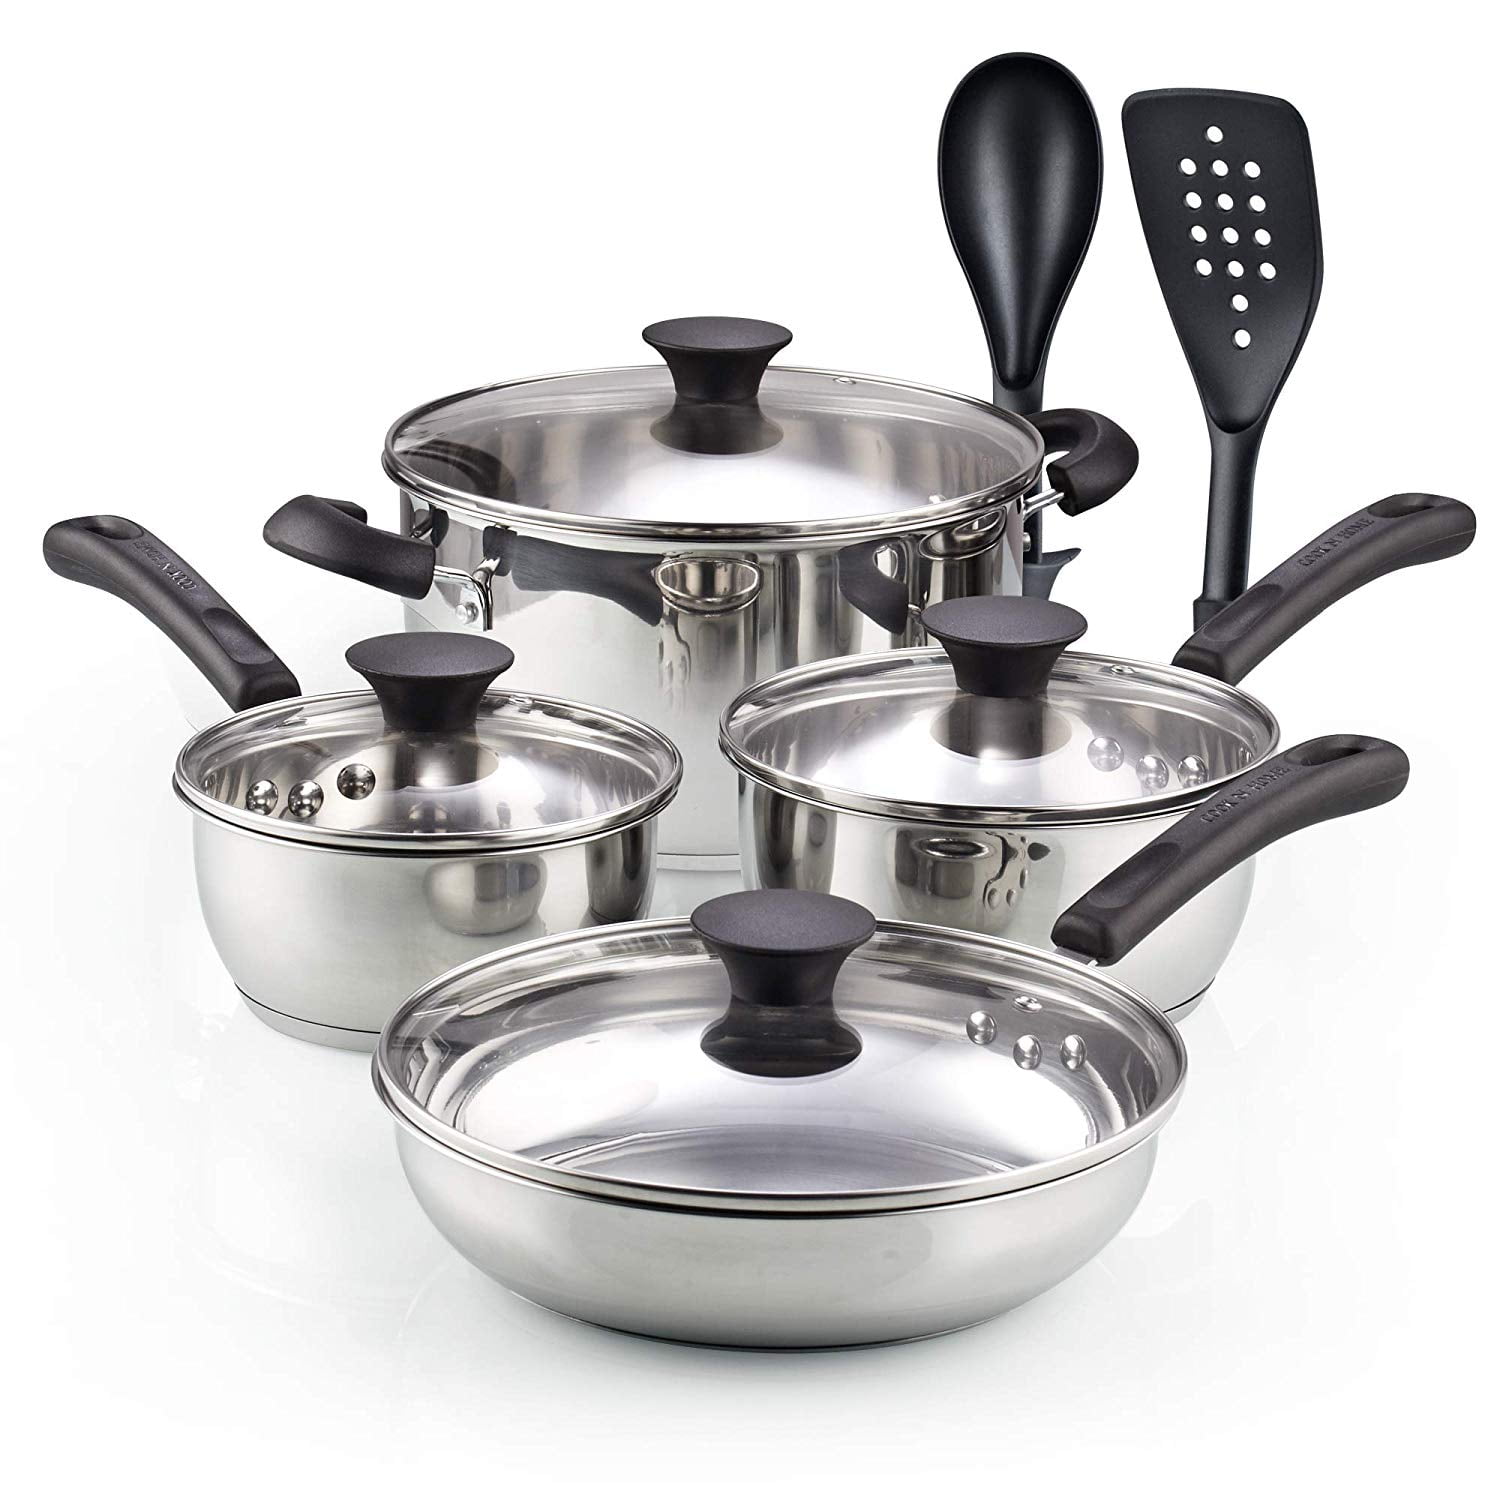 Cook N Home 02642, 10 Pieces pots and pans Stainless Steel Cookware Set ...